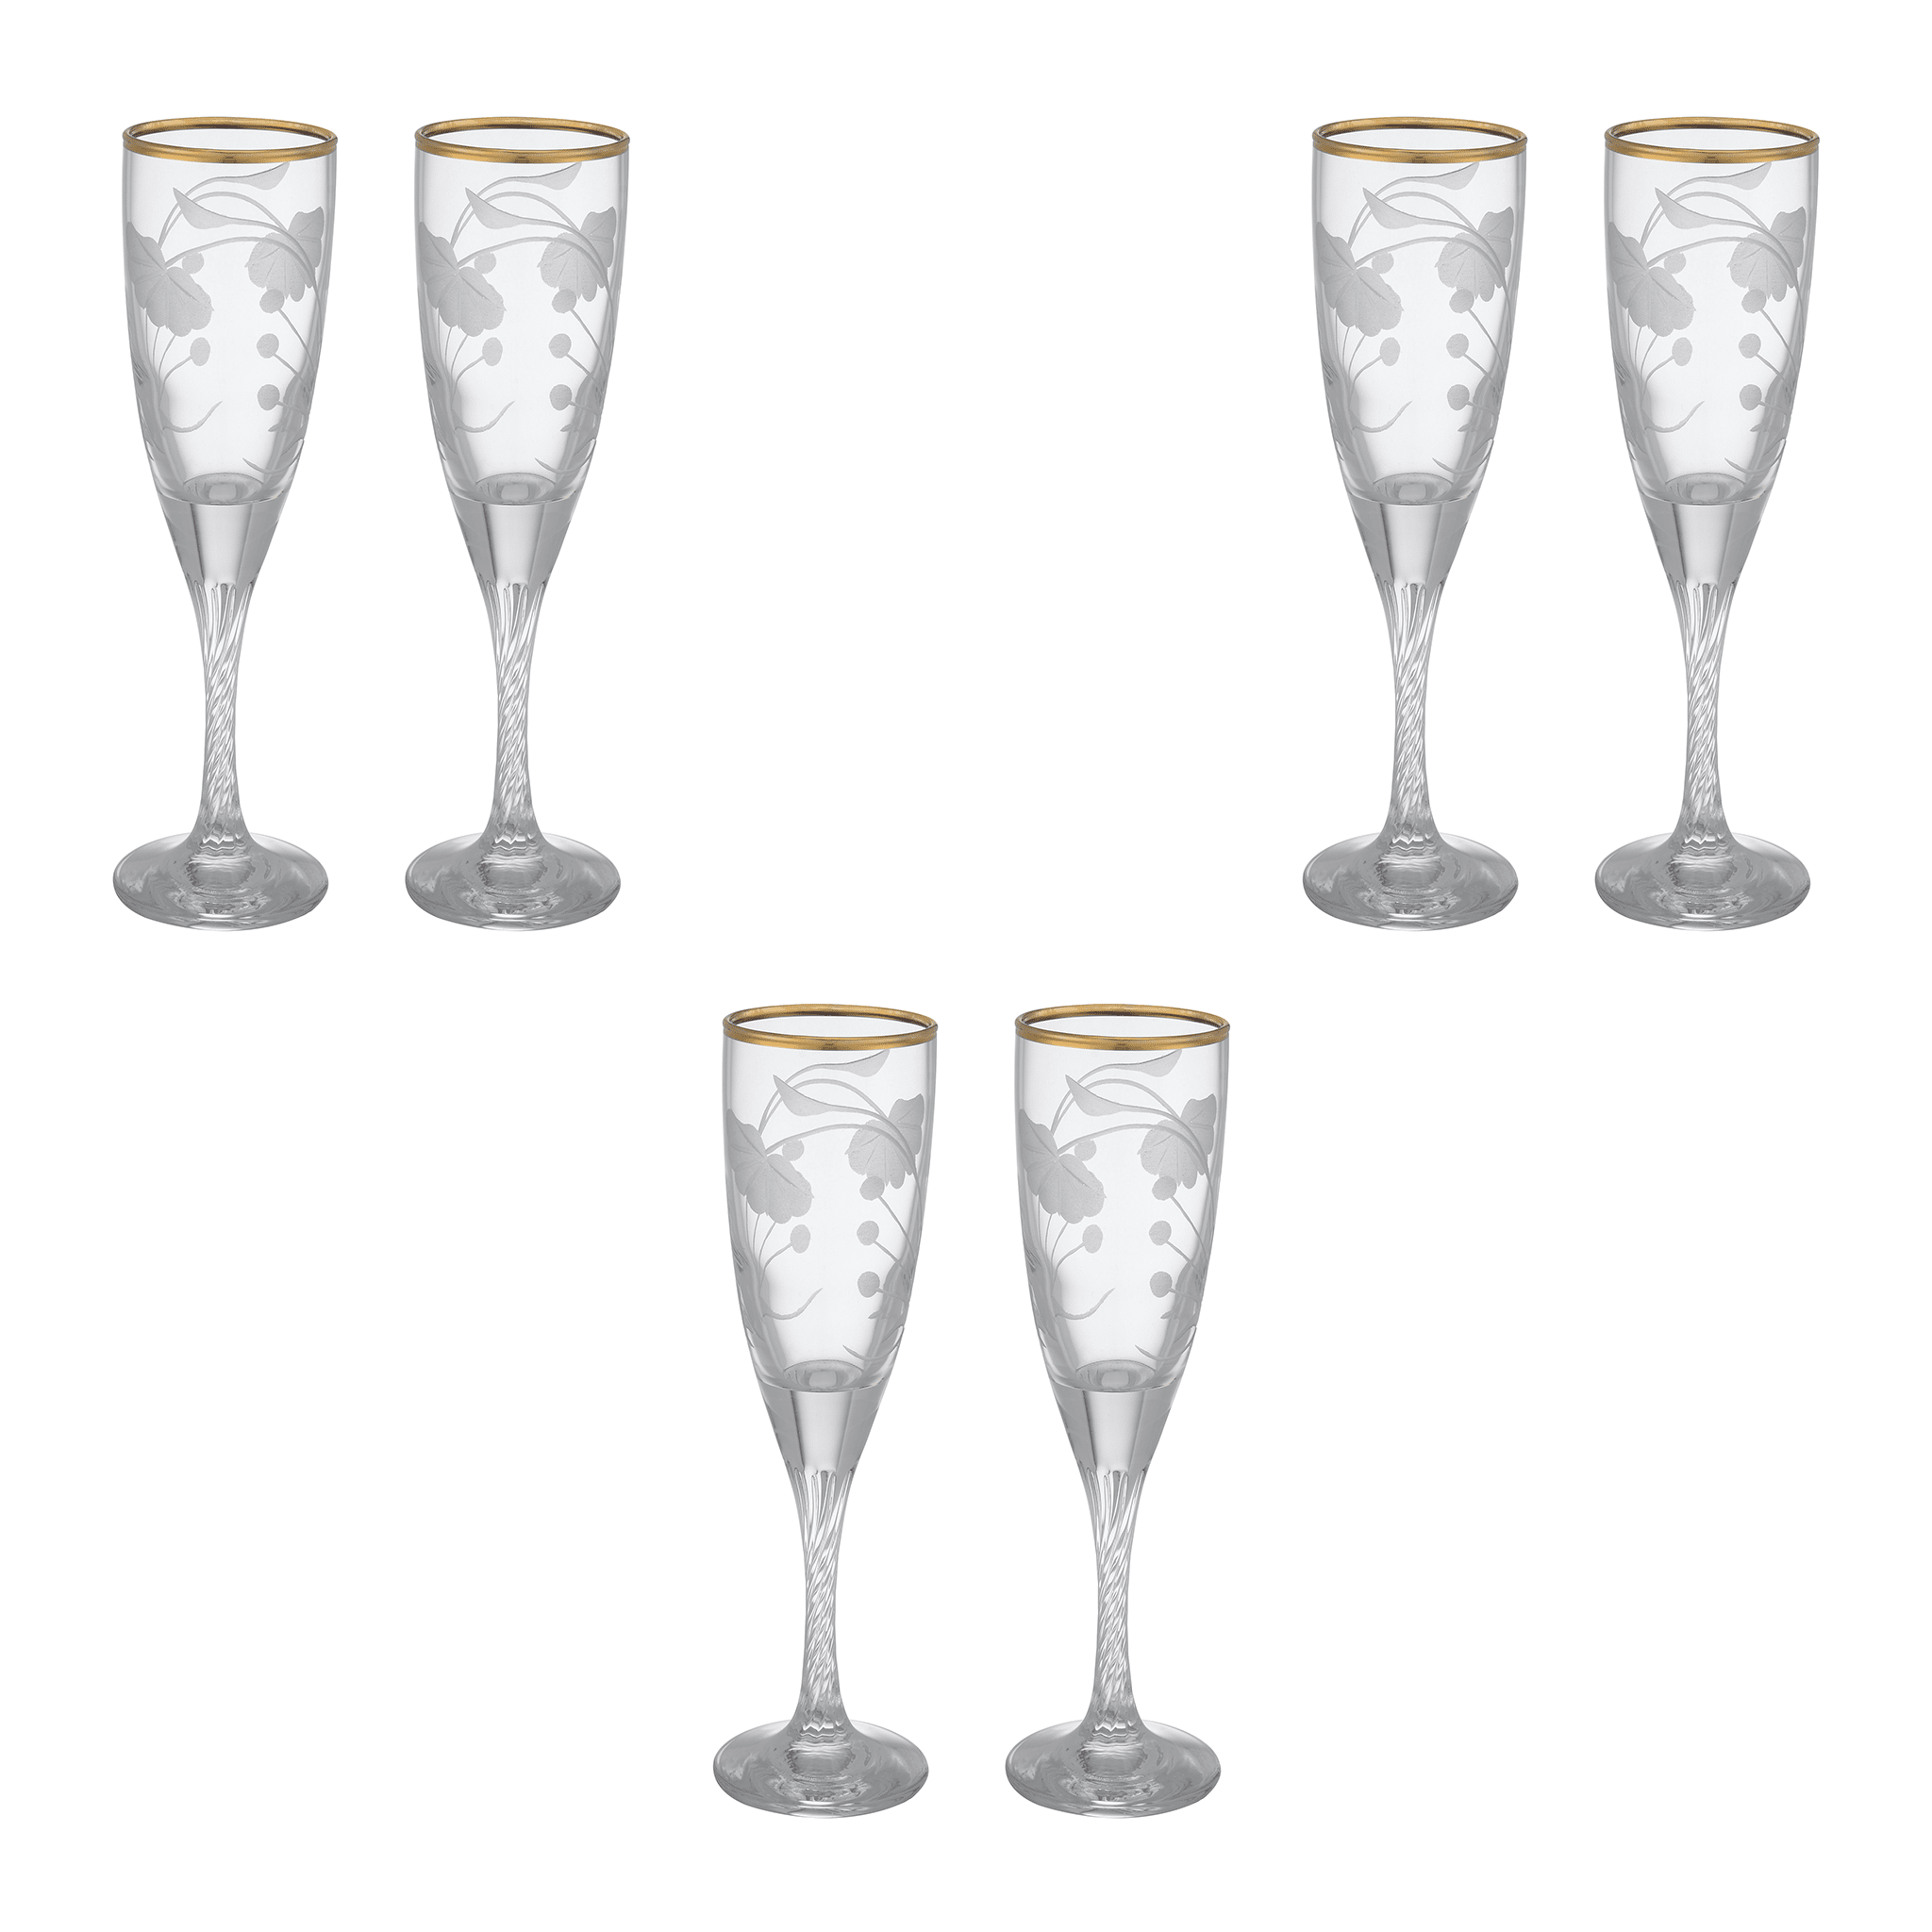 Pasabahce - Decorated Flute Glass Set 6 Pieces - Gold - 150ml - Glass - 390005045